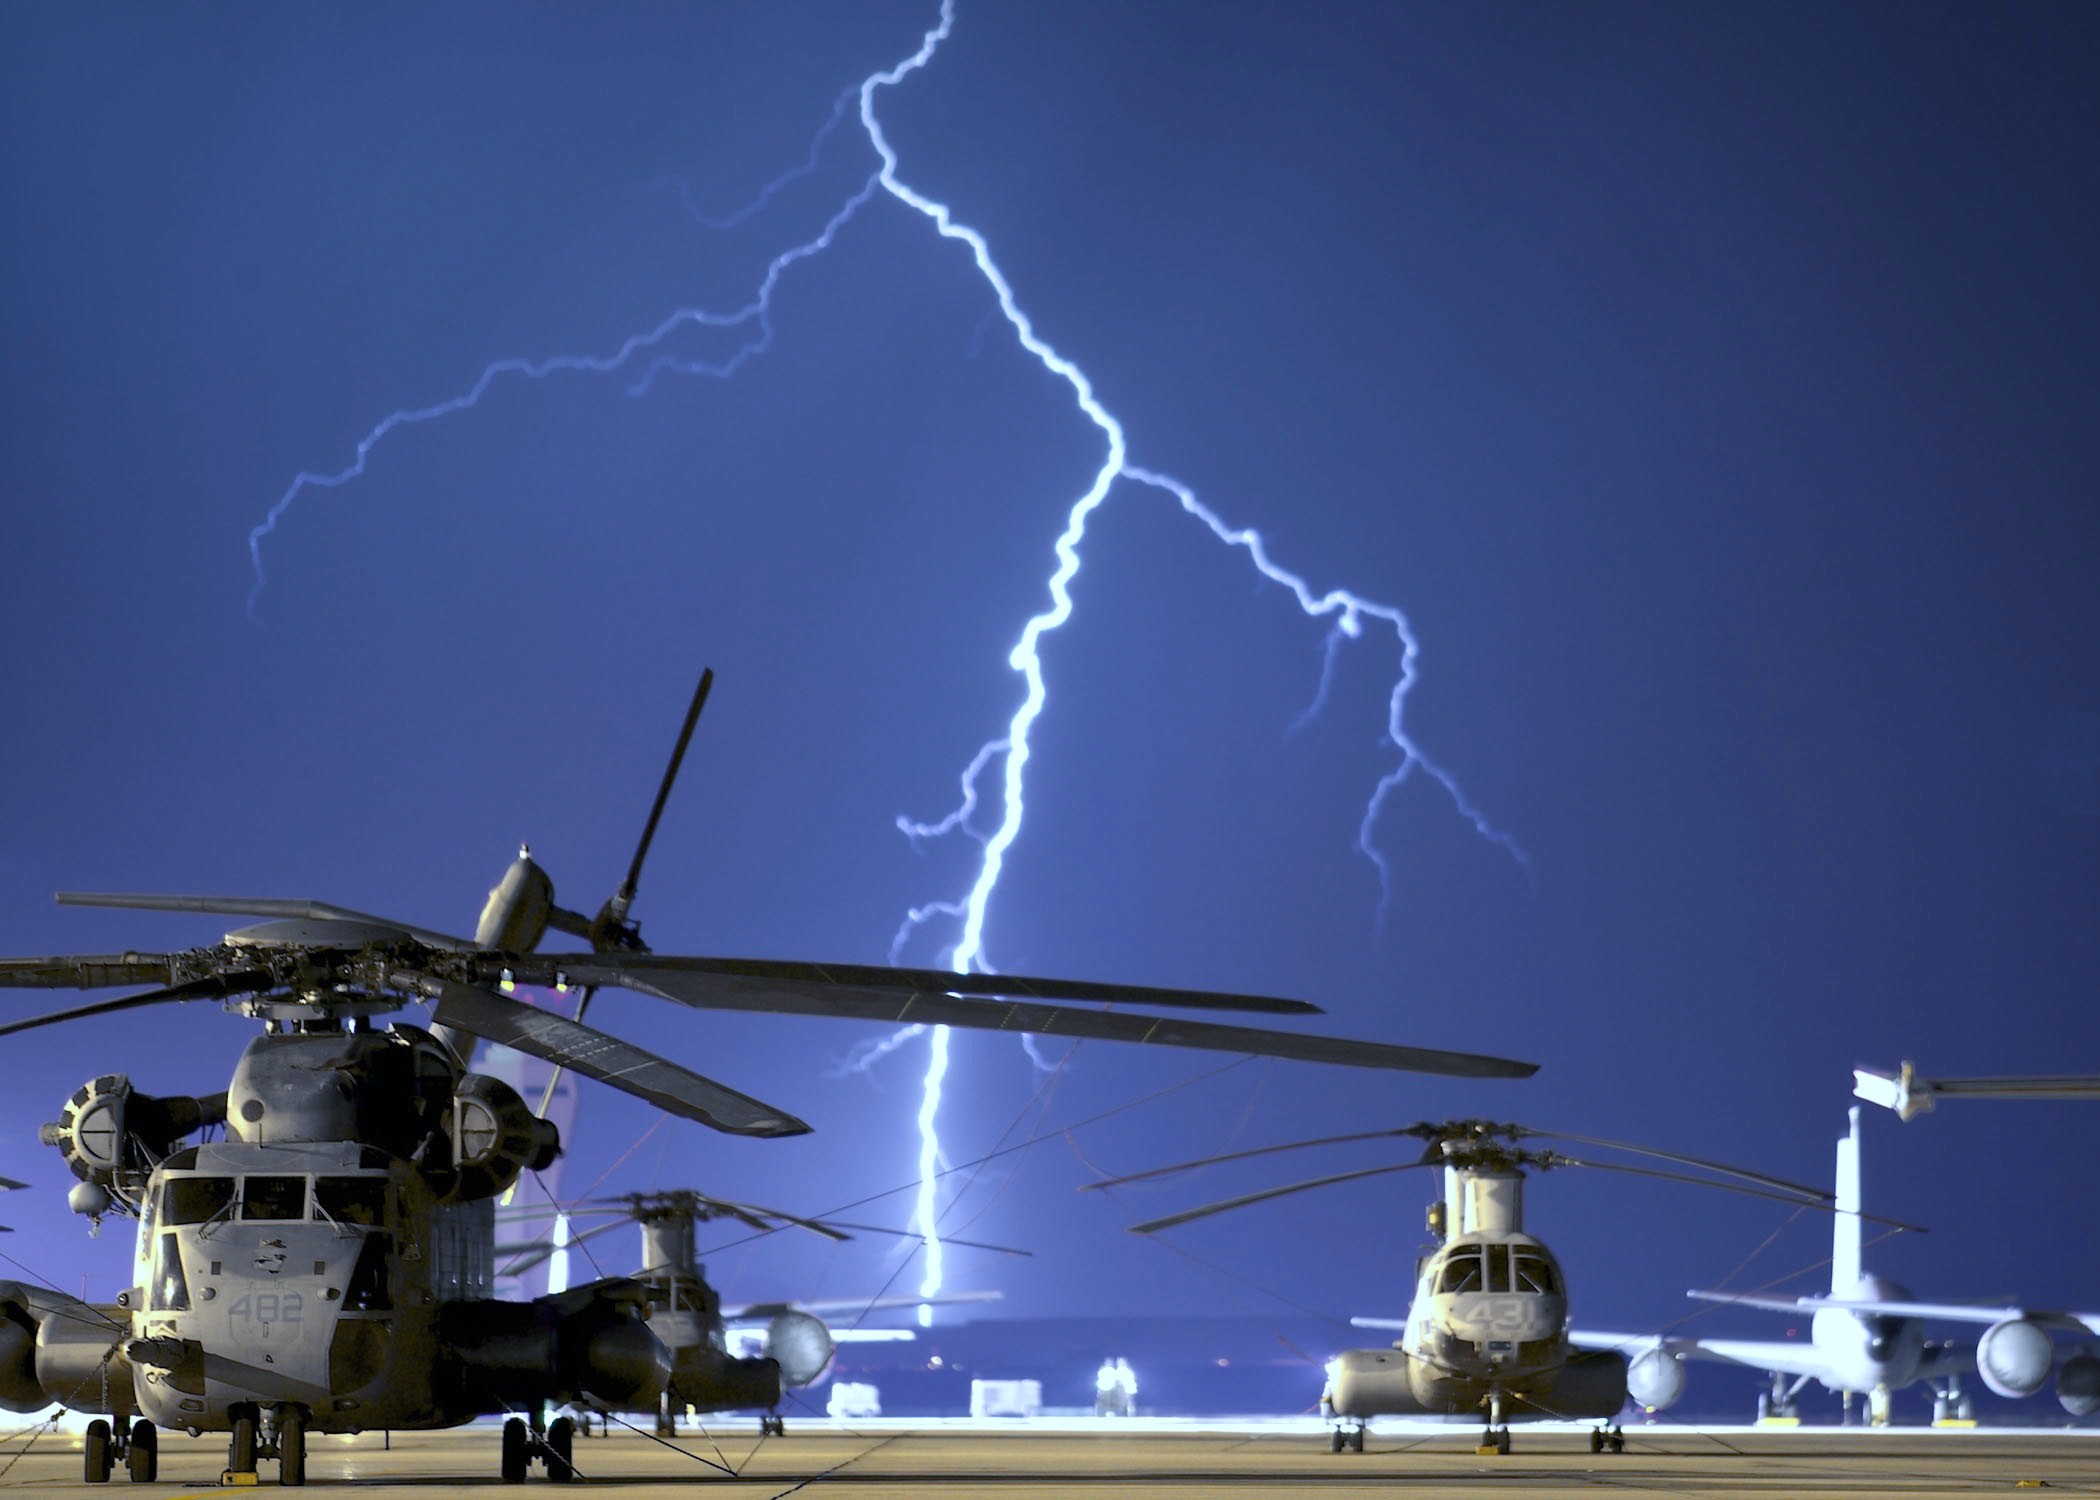 Military helicopters, including Ch-53 Super Stallion & Ch-46 Sea Knight, in a captivating desktop wallpaper.